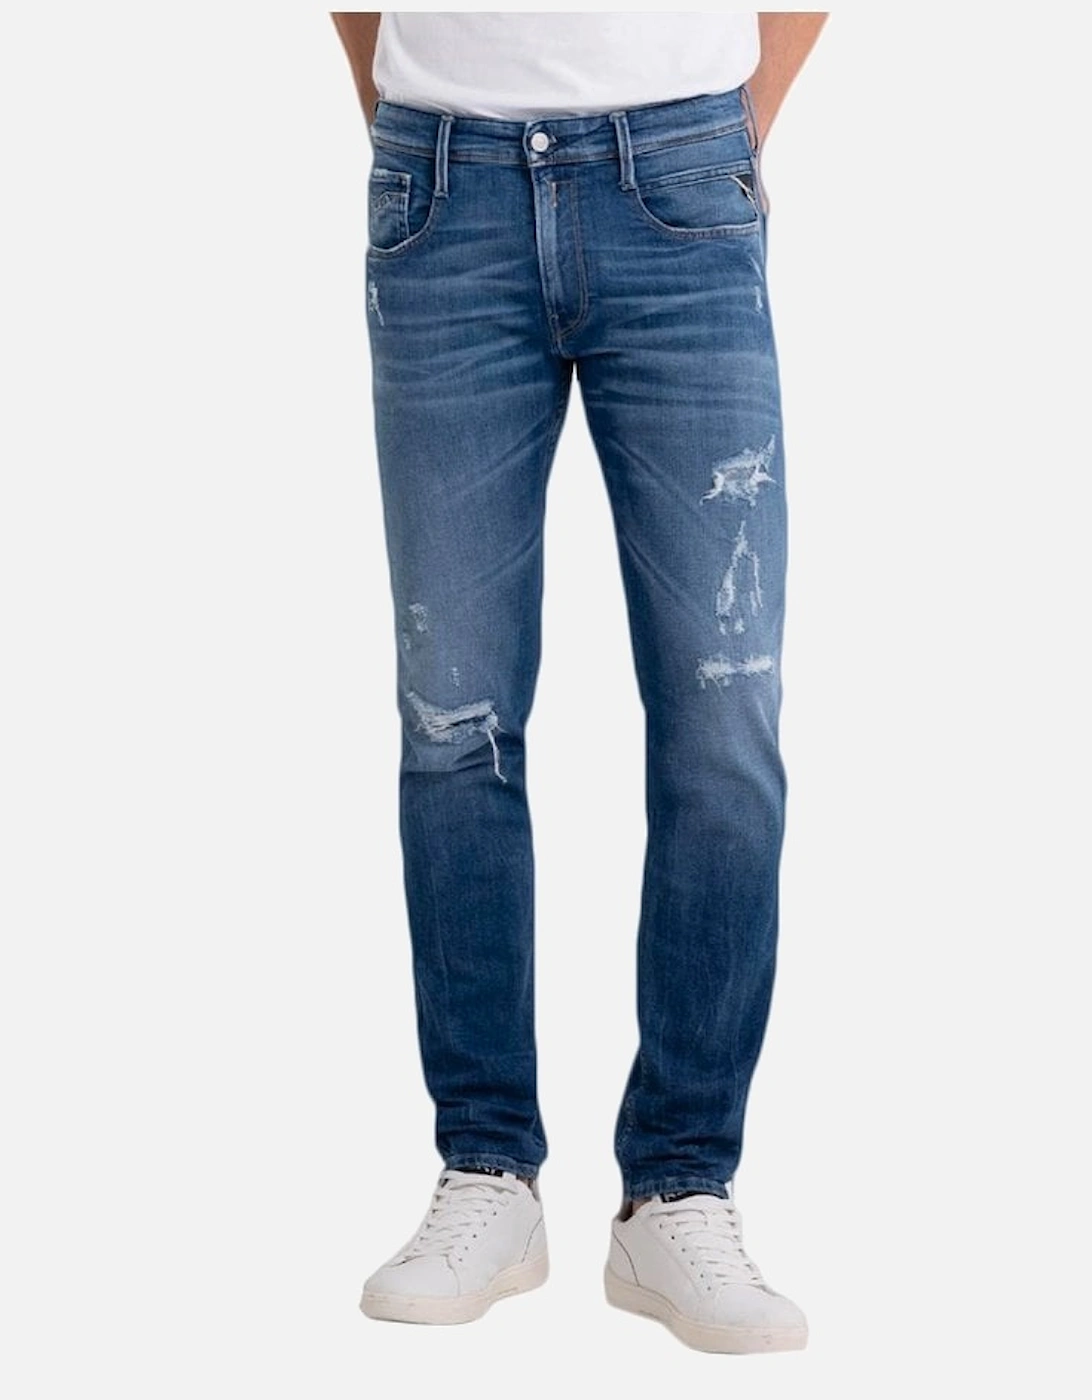 573 Bio Anbass Stretch Distressed Worn Look Jean 009, 8 of 7